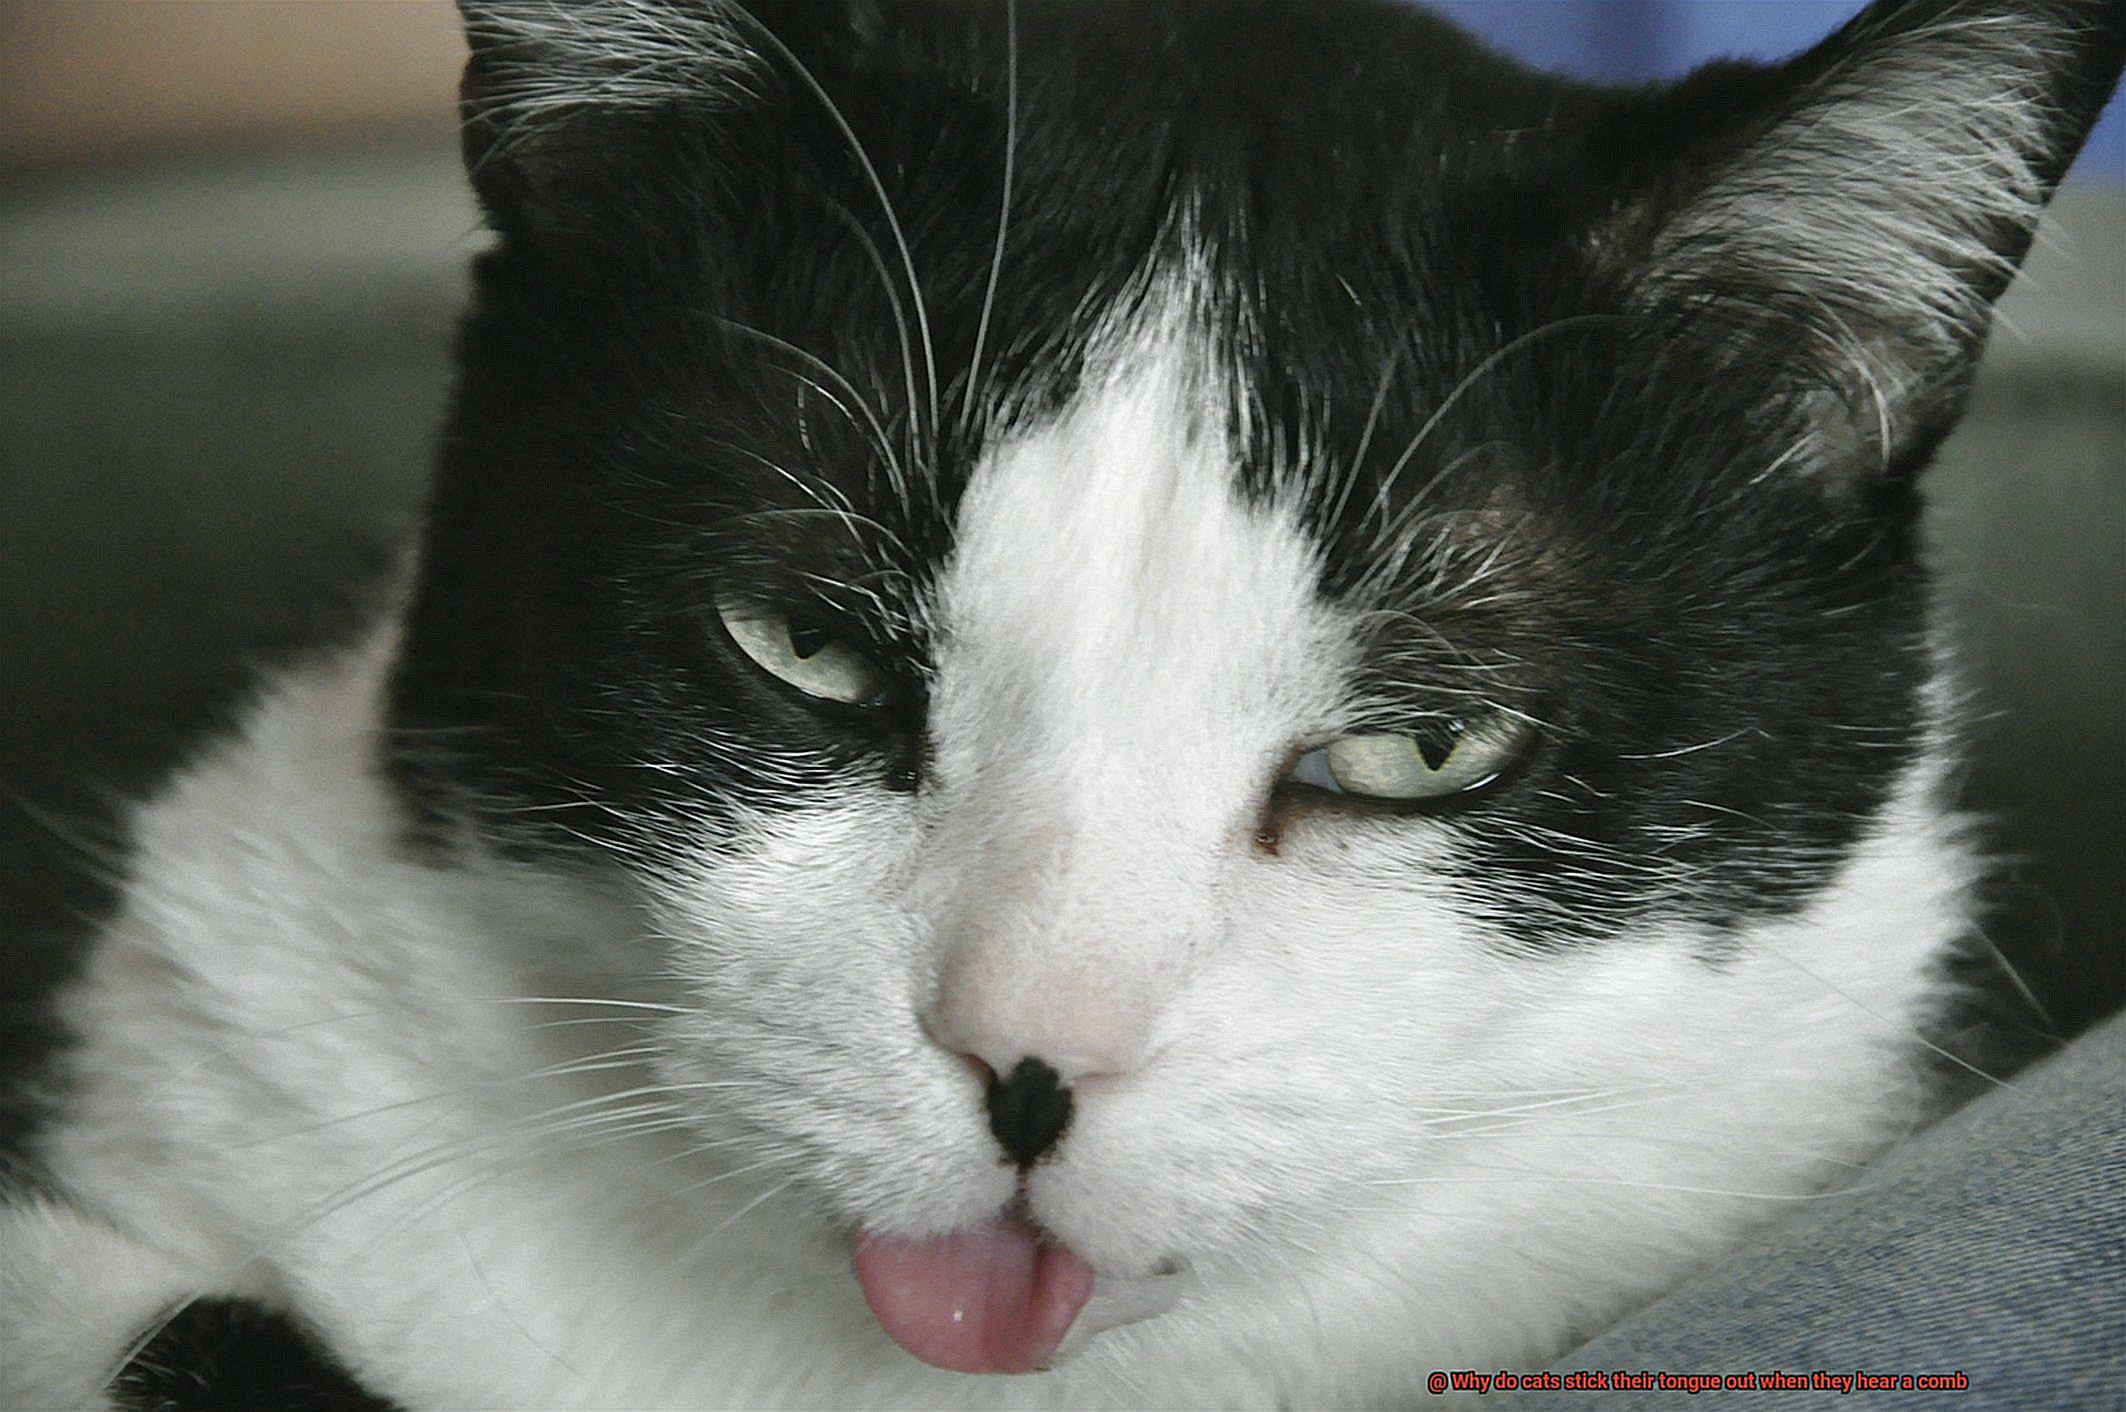 Why do cats stick their tongue out when they hear a comb-3